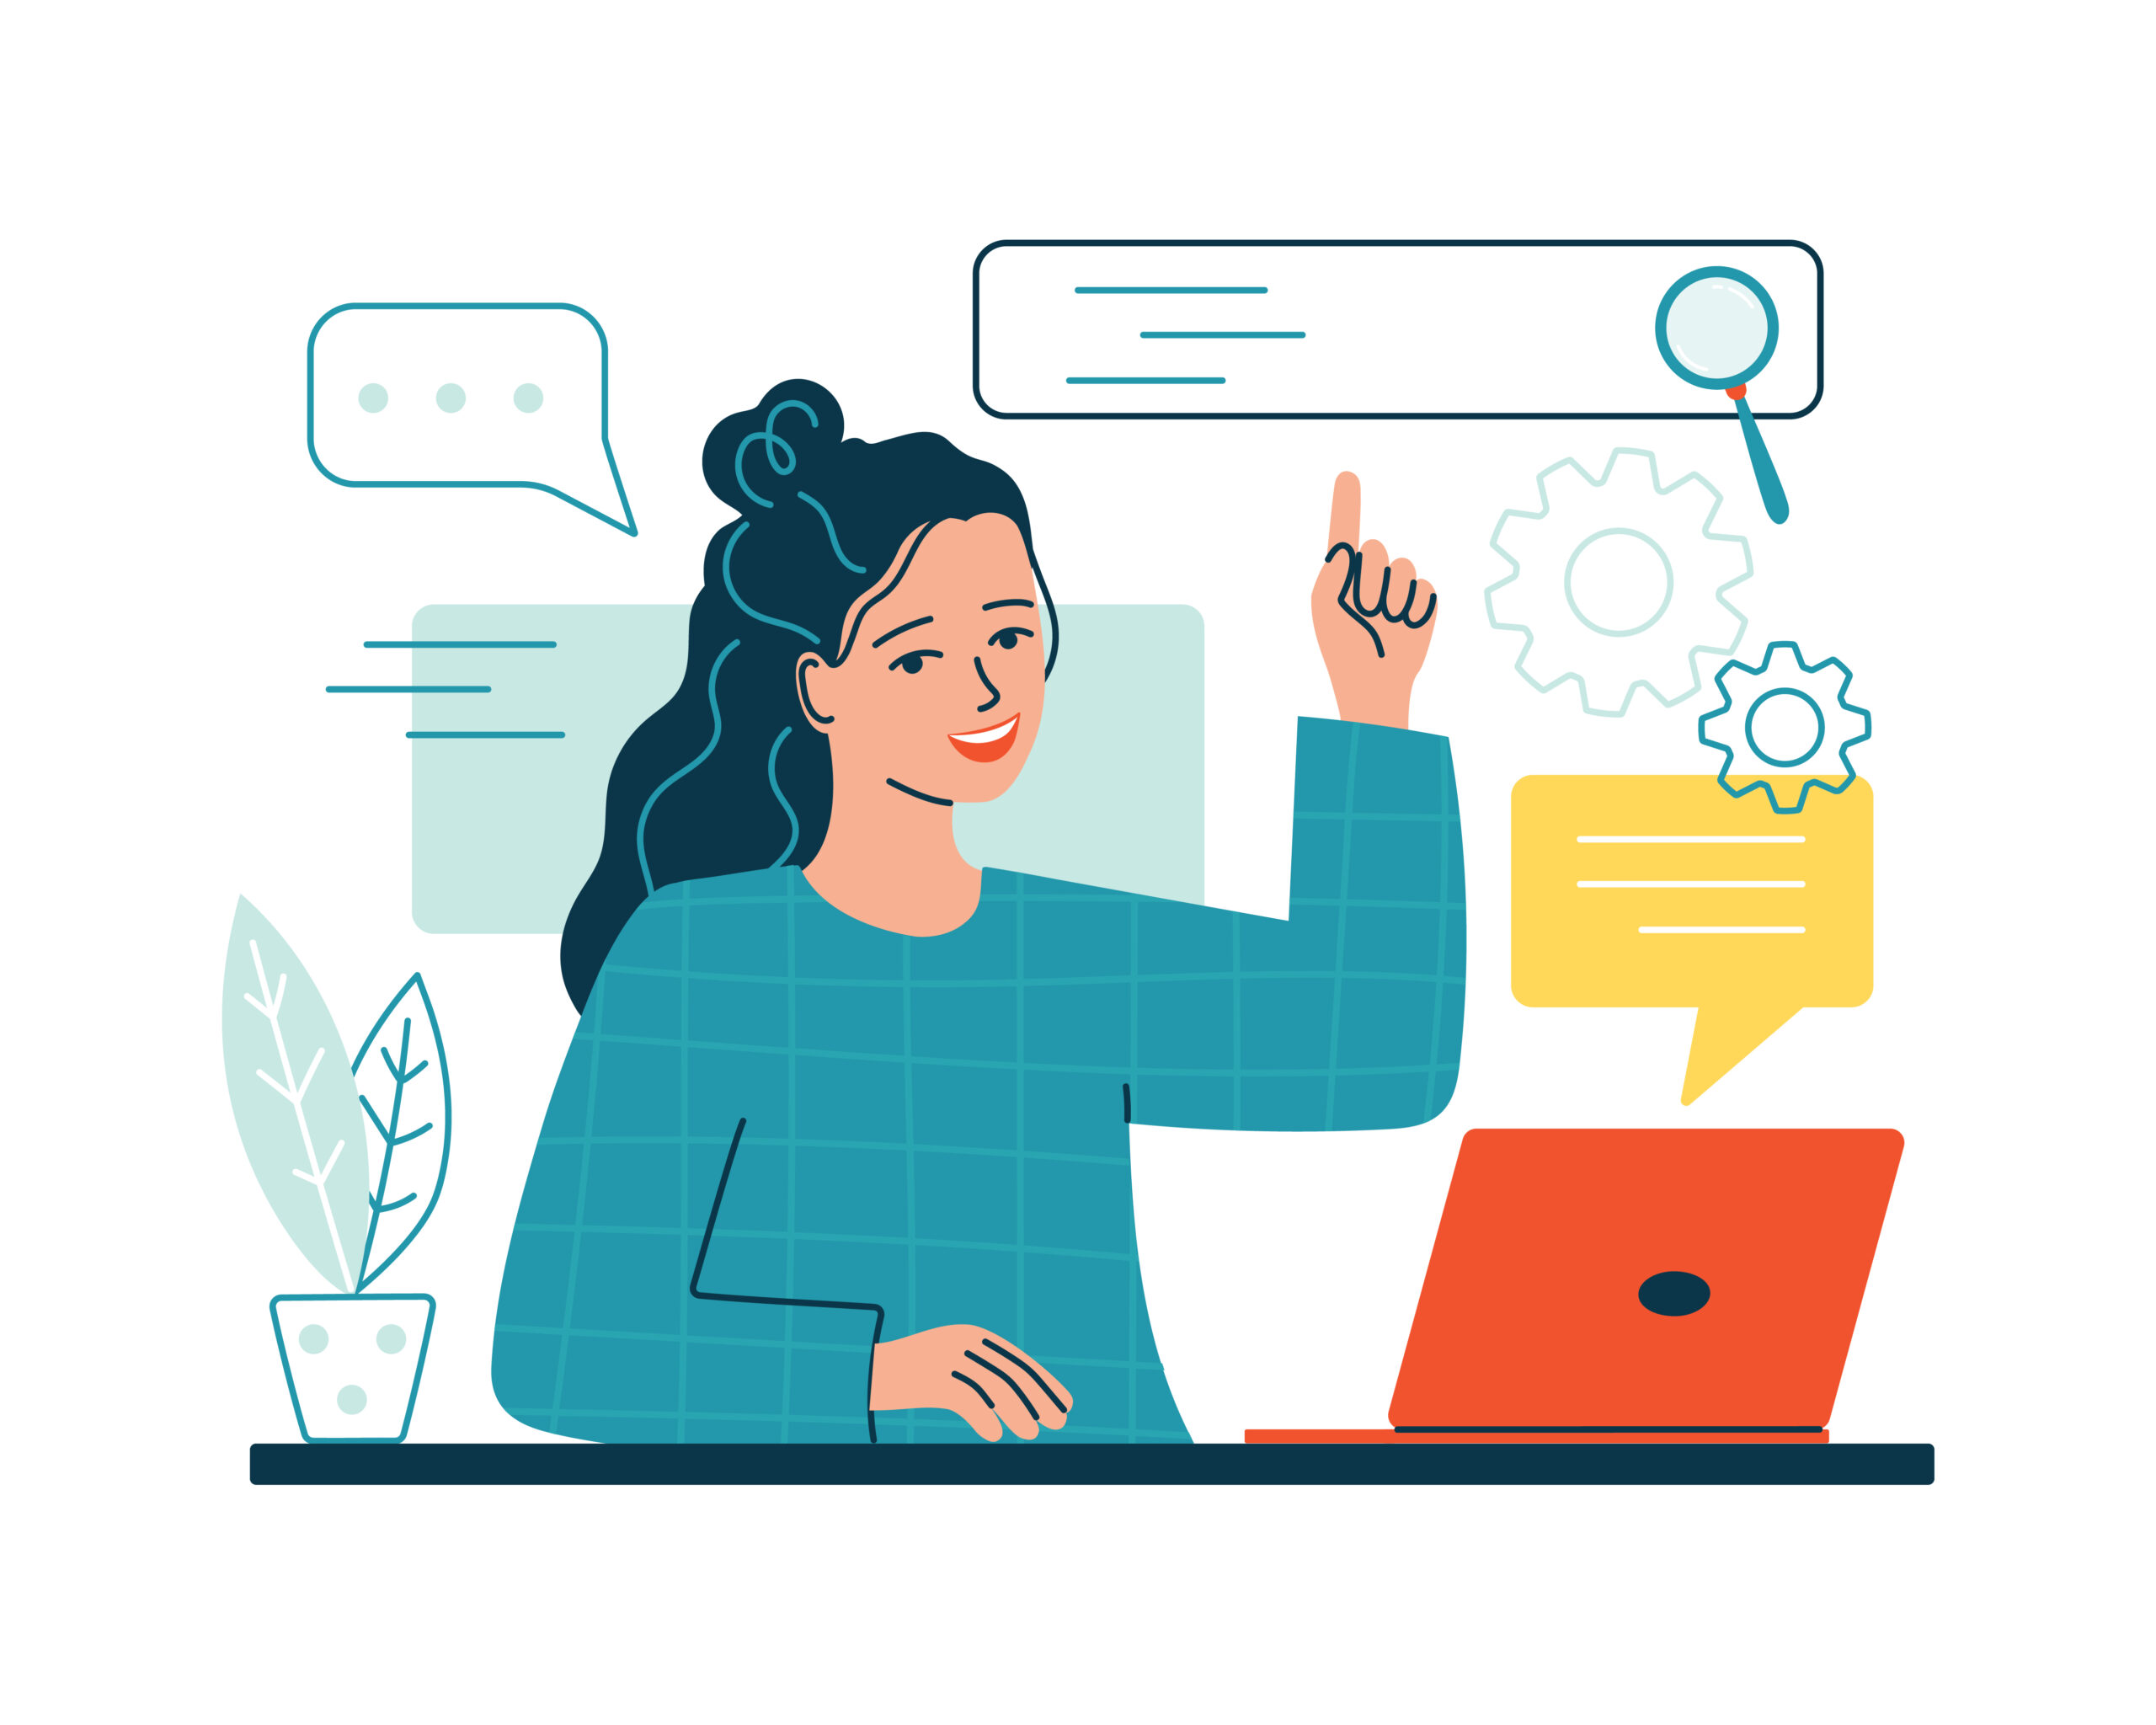 Woman with laptop look for information in database. Concept of quick easy document search, data organization in computer. Optimization of finding websites, files or research. Flat vector illustration